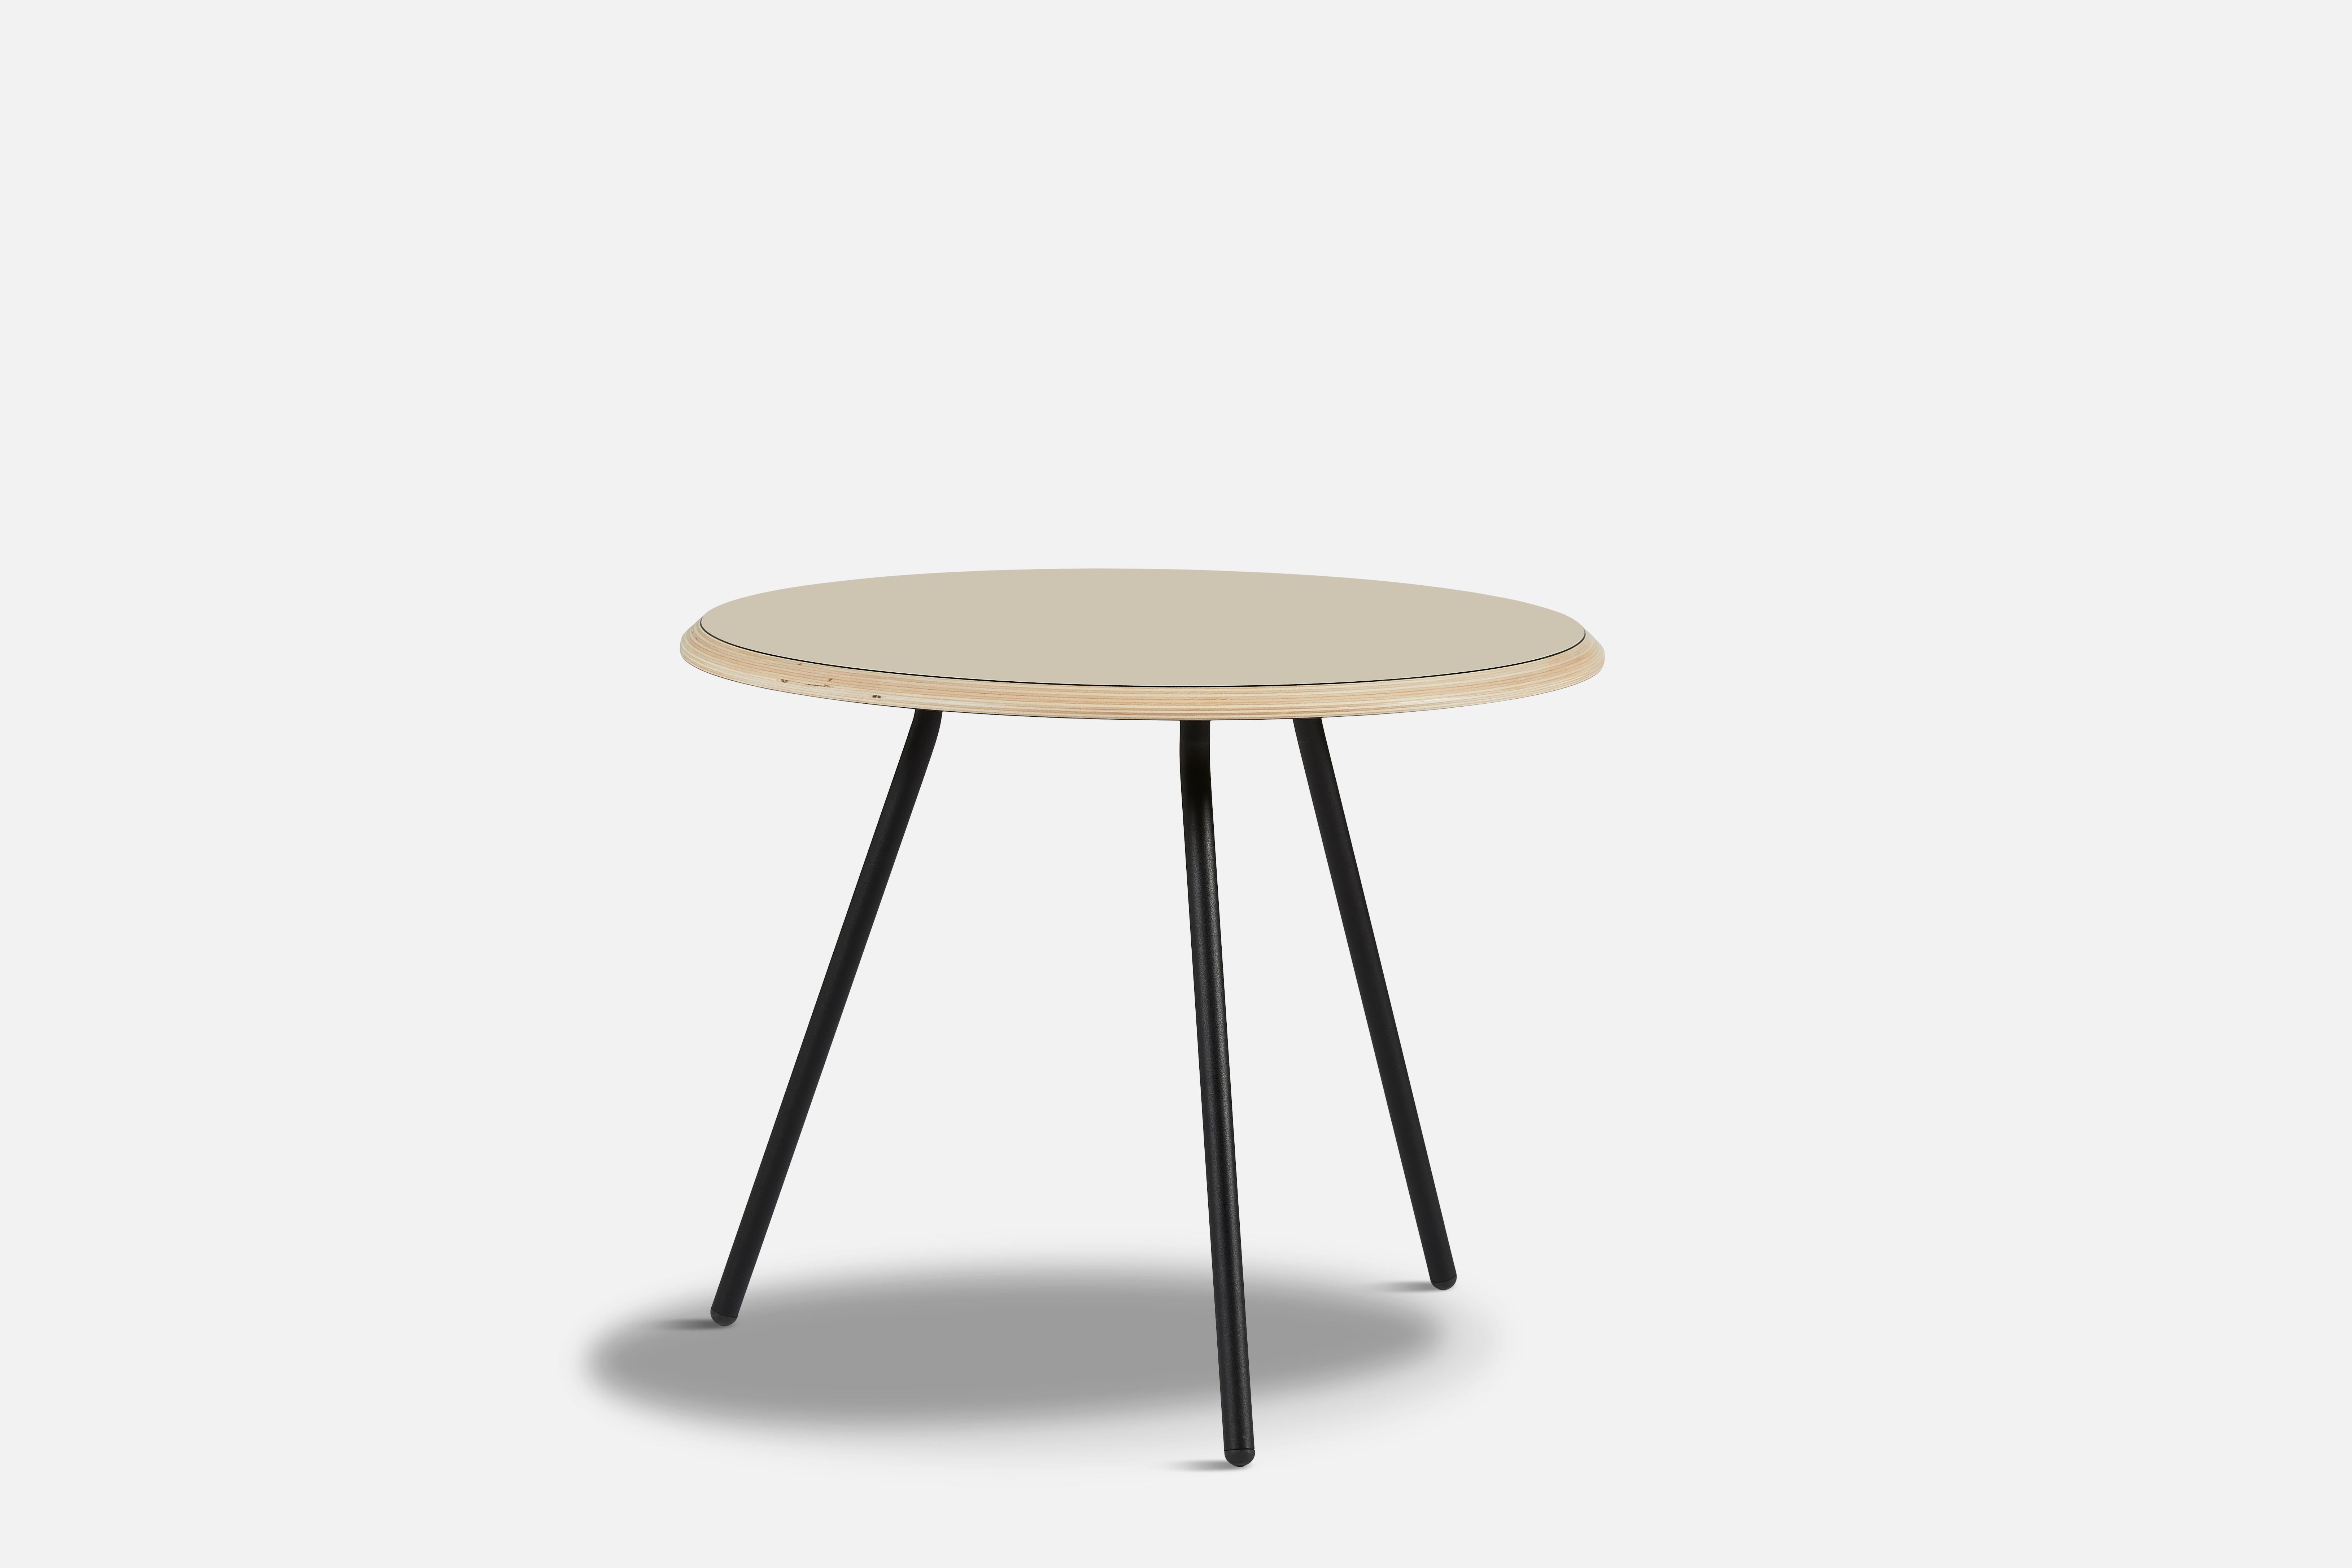 Beige Fenix Laminate Soround coffee table 60 by Nur Design
Materials: Metal, Fenix Laminate
Dimensions: D 60 x W 60 x H 49 cm.
Also available in different sizes.

The founders, Mia and Torben Koed, decided to put their 30 years of experience